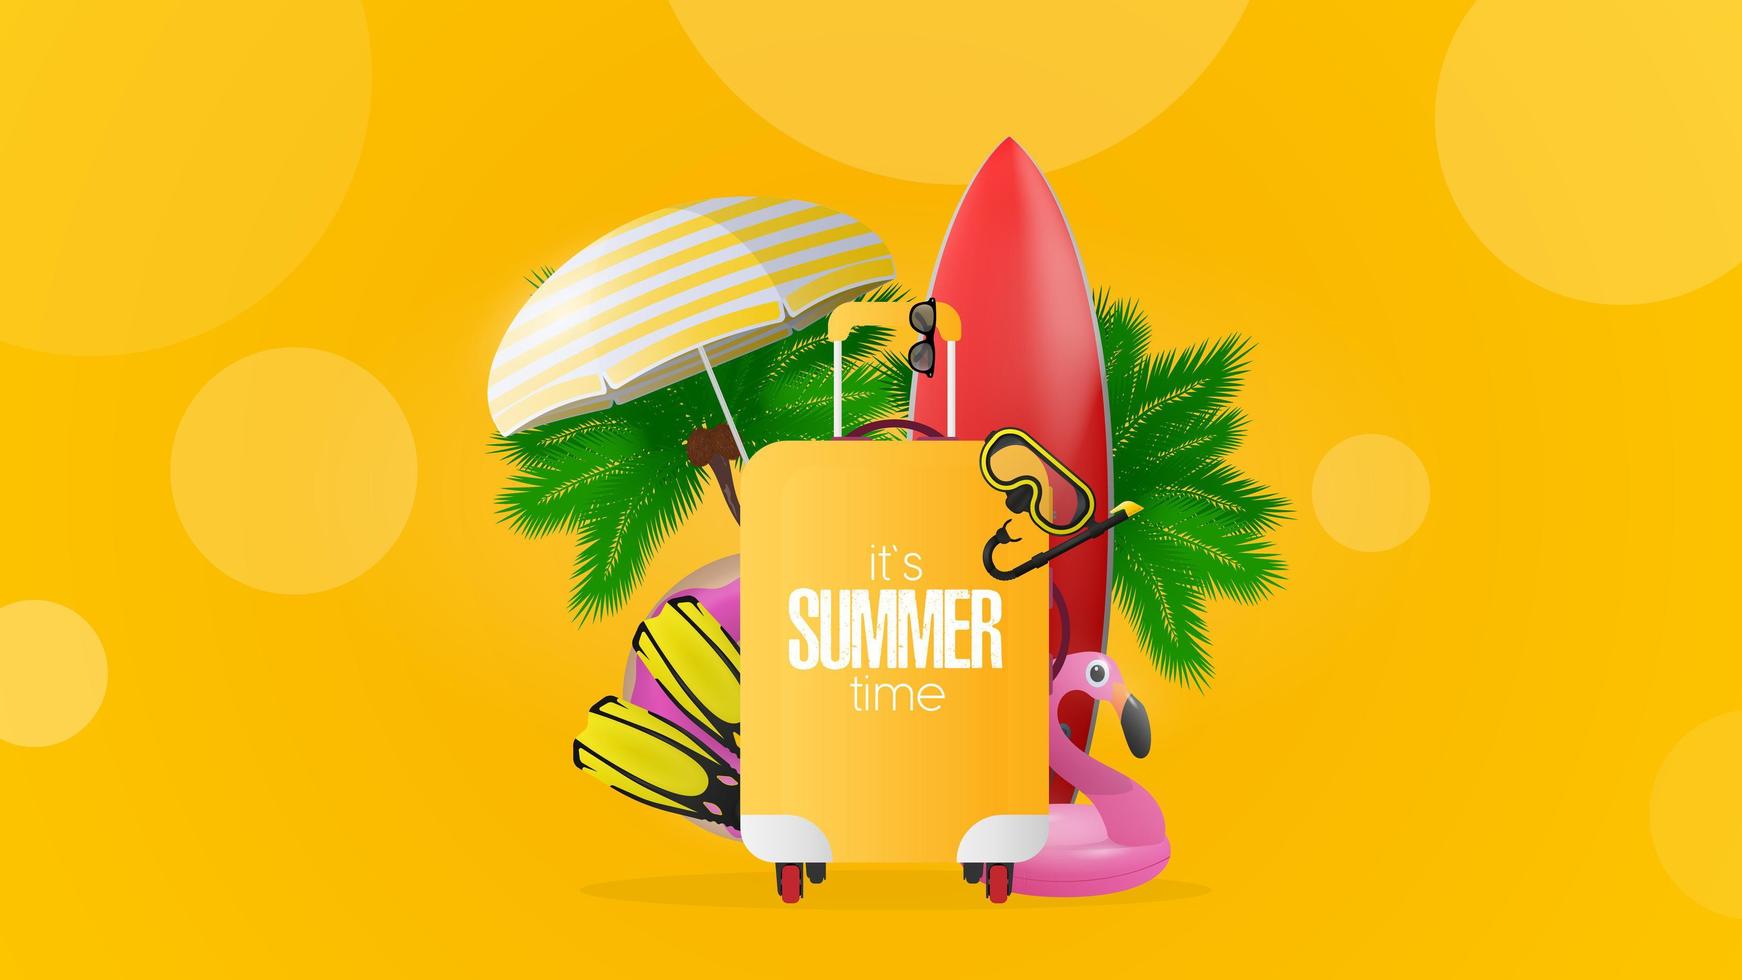 Composition on the theme of summer time. Yellow summer banner. Red surfboard, yellow suitcase for tourism, flippers, swimming mask, goggles, palm trees, umbrella, rubber rings for swimming. Vector. vector